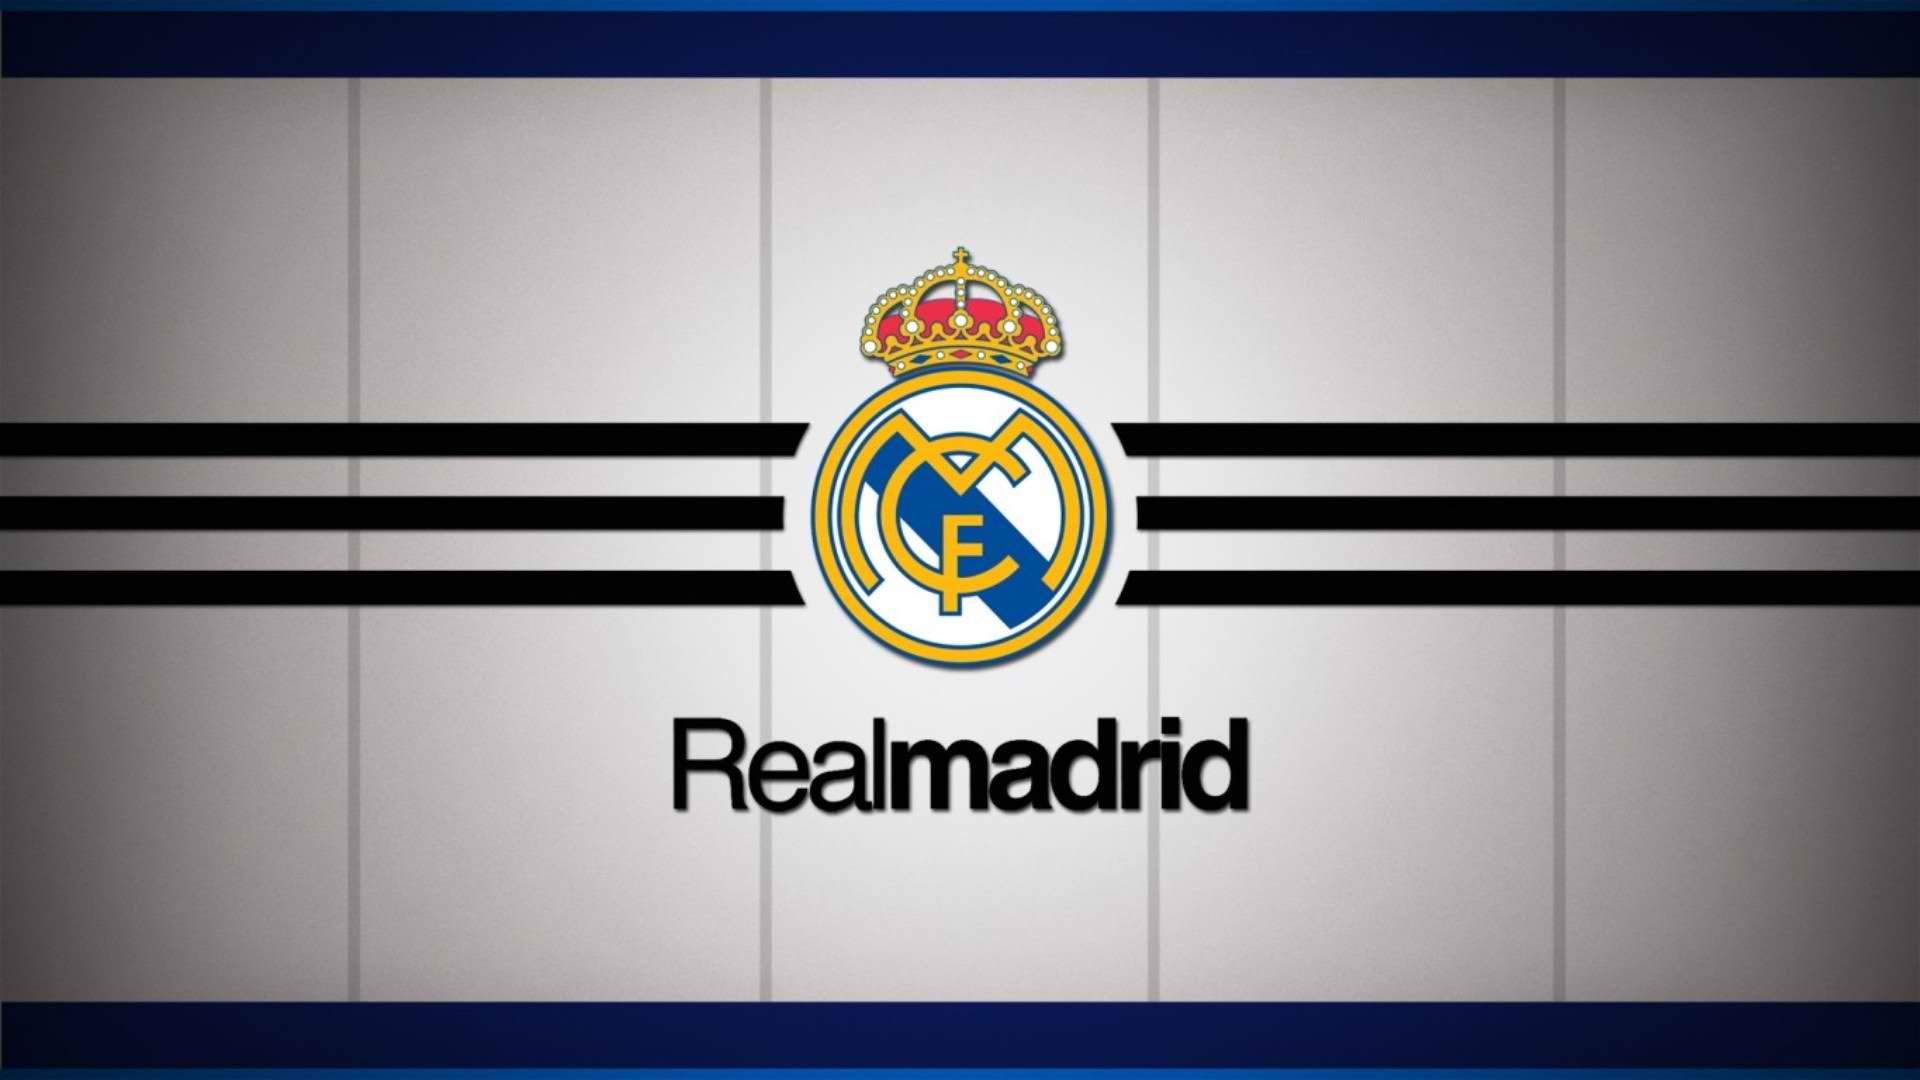 HD Real Madrid Wallpapers With Resolution 1920X1080 pixel. You can make this wallpaper for your Mac or Windows Desktop Background, iPhone, Android or Tablet and another Smartphone device for free